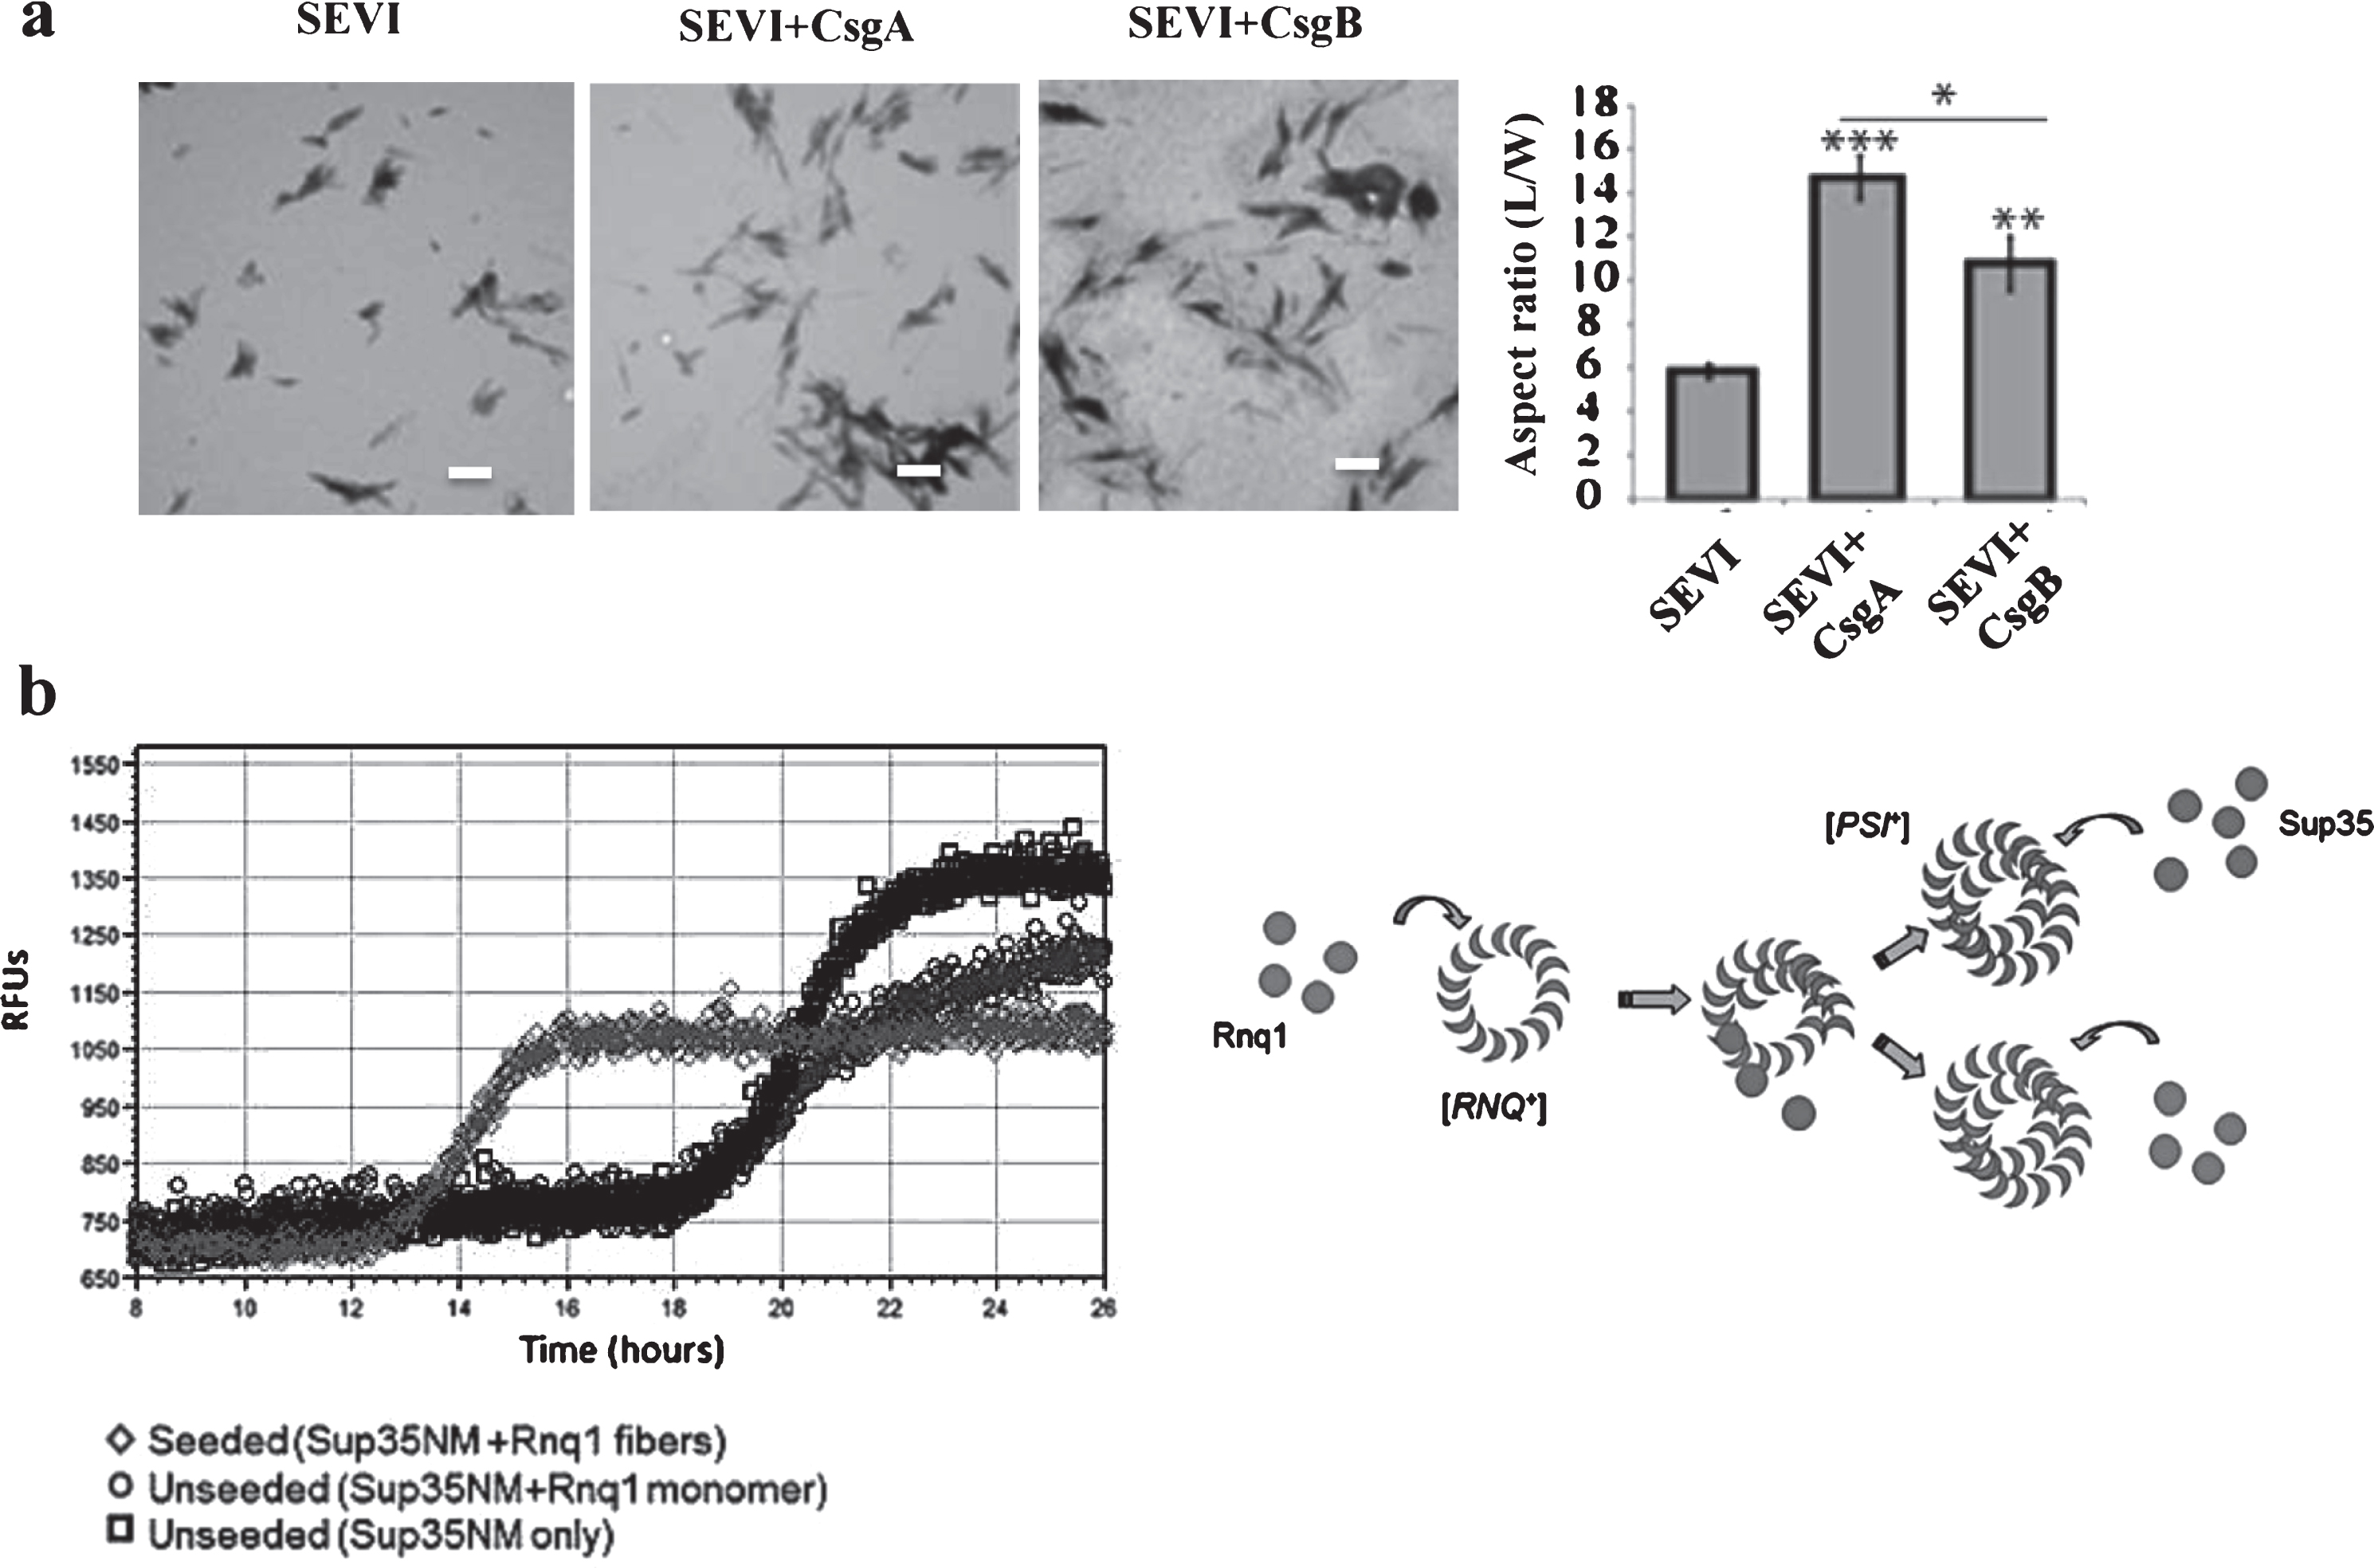 Physiological roles of the CR of APs in microorganisms. a) Bacterial curli protein promotes the conversion of PAP248–286 into the amyloid SEVI. Electron microscopic images of SEVI fibers formed in the absence of curli (left) and in the presence of 5 mol% CsgA (middle) and CsgB (right) fibers. Fibers were grown at a concentration of 440μM PAP248–286 at 37°C under 1400 rpm orbital shaking for 7 days. Bars = 500 nm. Quantification of the fibers are shown. b) Heterologous prion-forming proteins interact to cross-seed aggregation in Saccharomyces cerevisiae. Modified from Hartman et al. [30] (a) and Keefer et al. [31] (b) with permission.